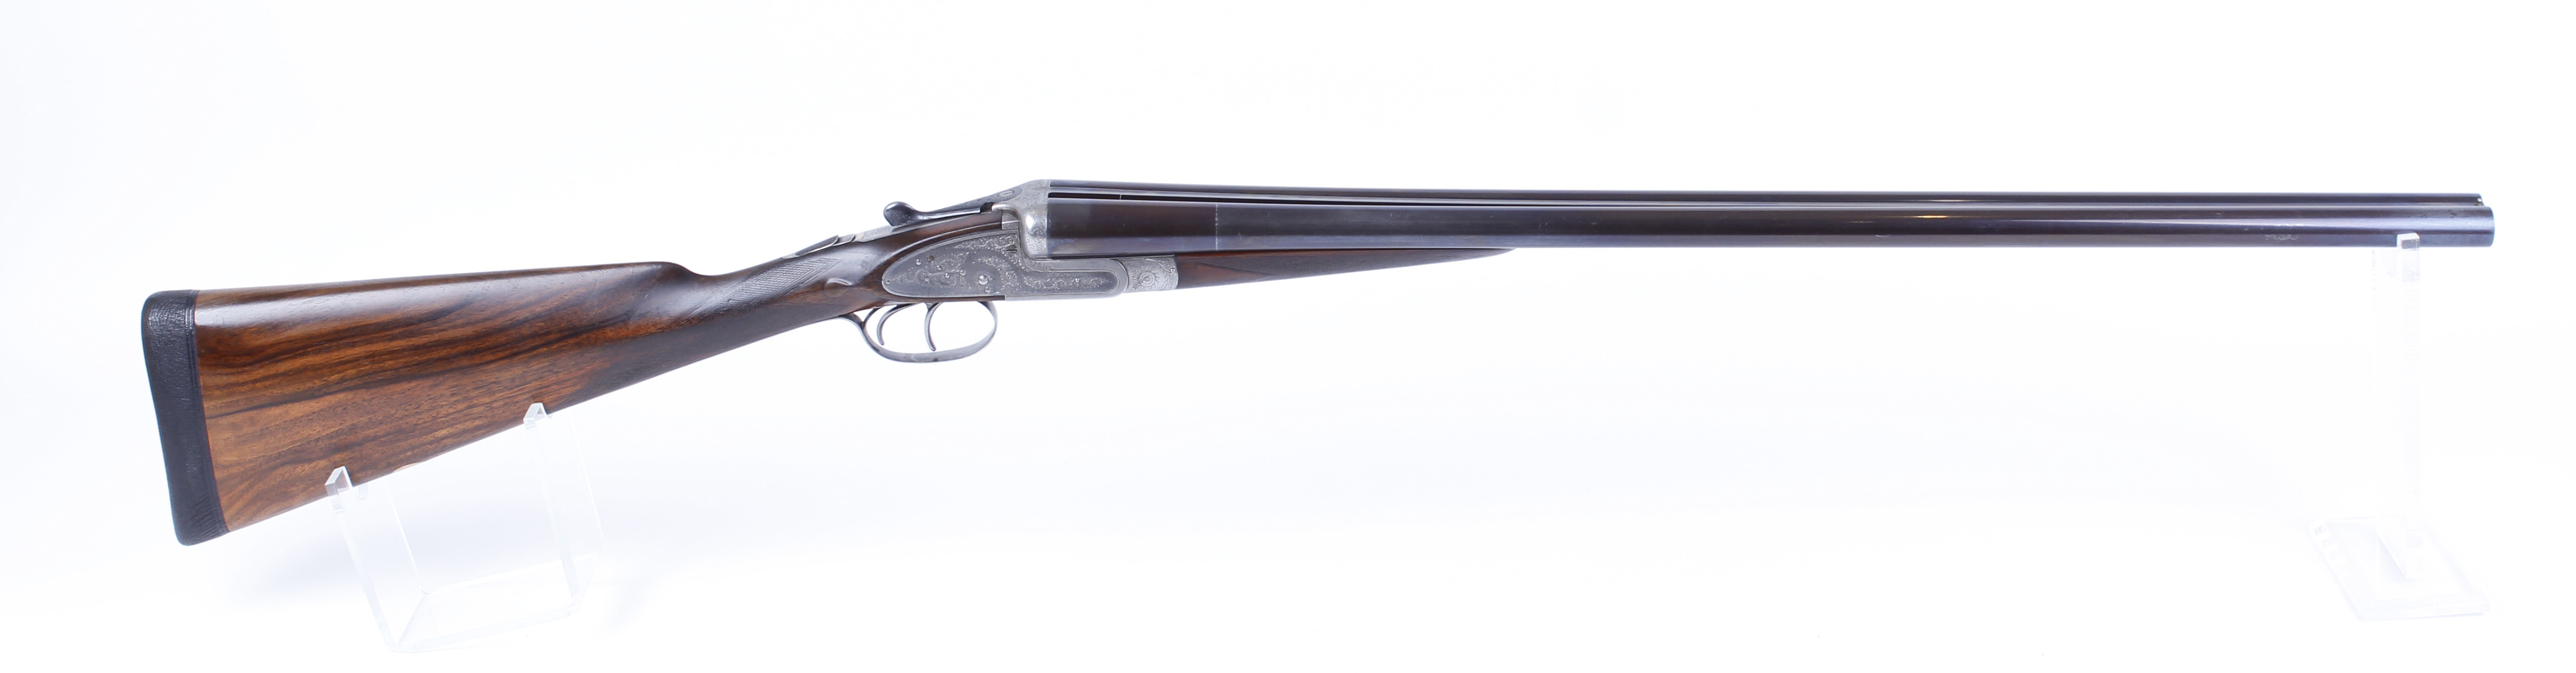 (S2) 12 bore sidelock ejector by Henry Akrill, 28 ins sleeved barrels, ¼ & ¾, concave rib with - Image 2 of 12